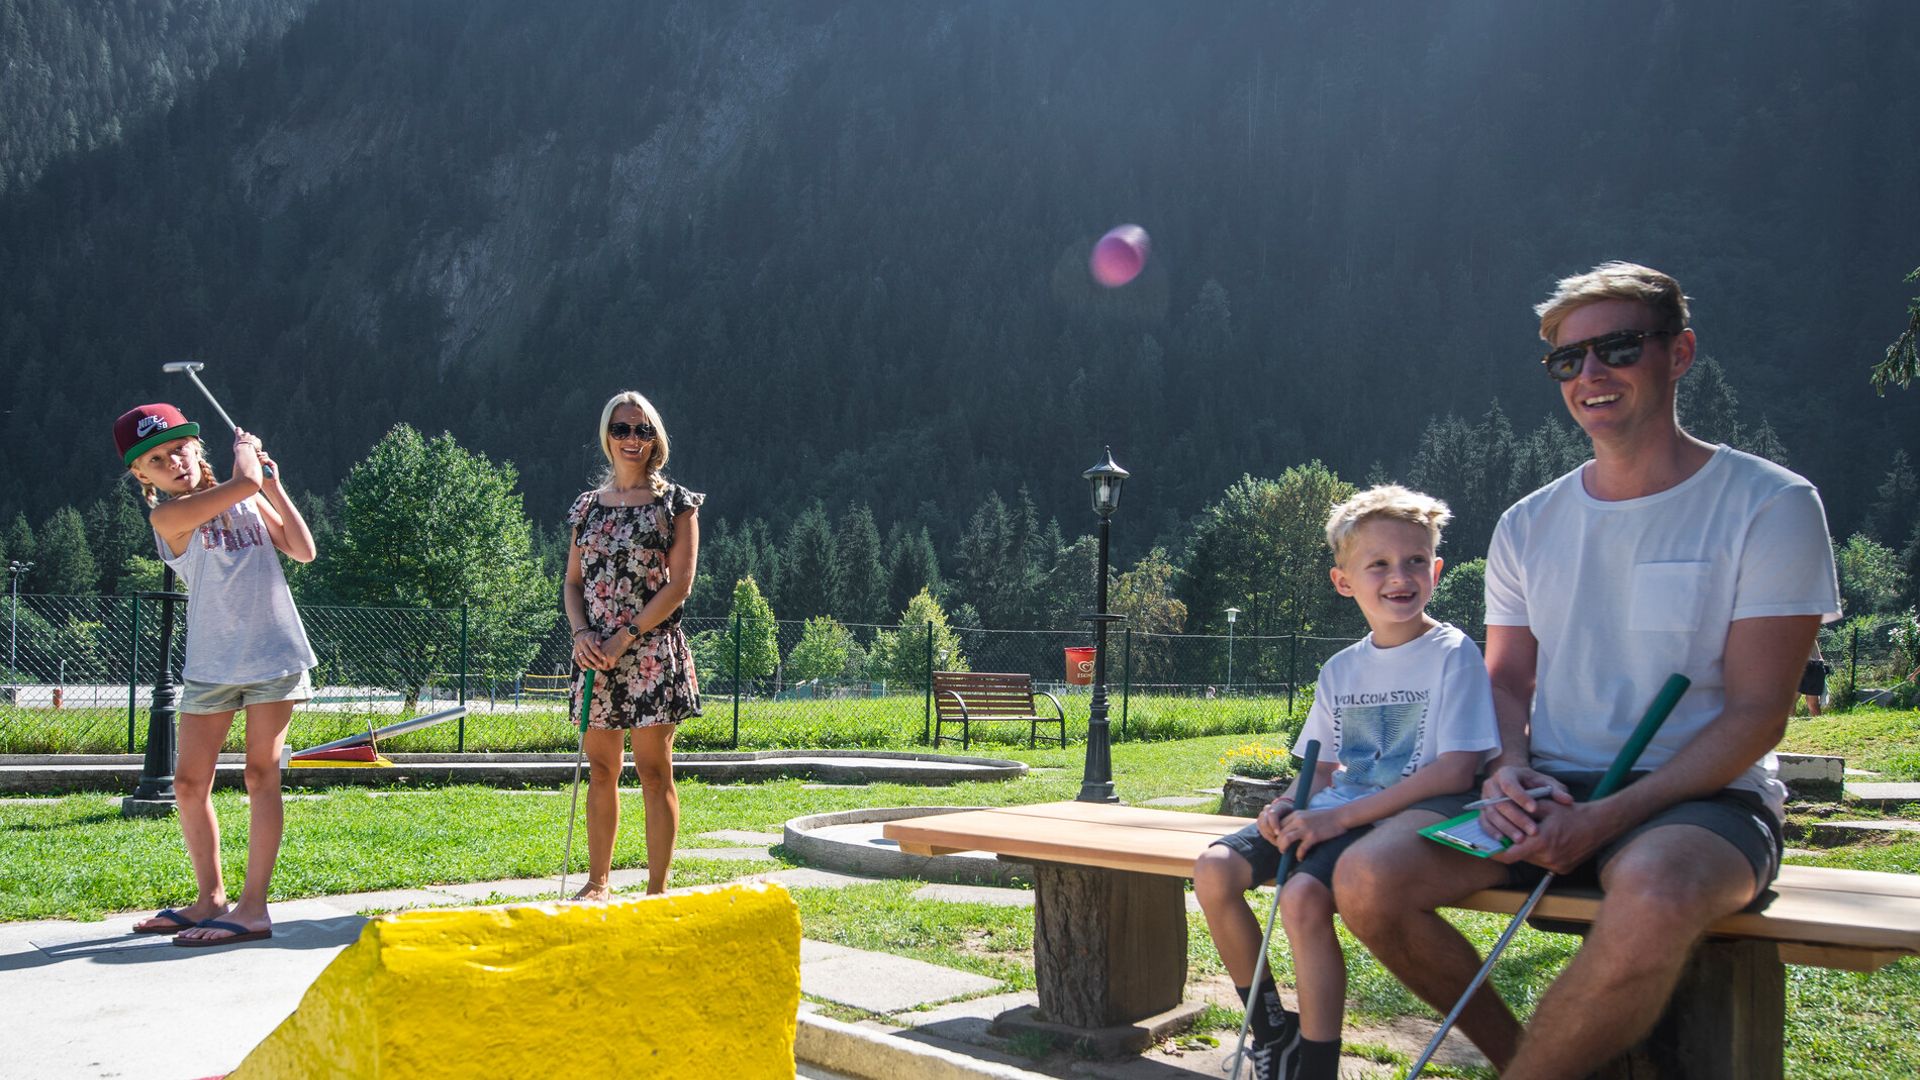 Family playing mini golf in Mayrhofen